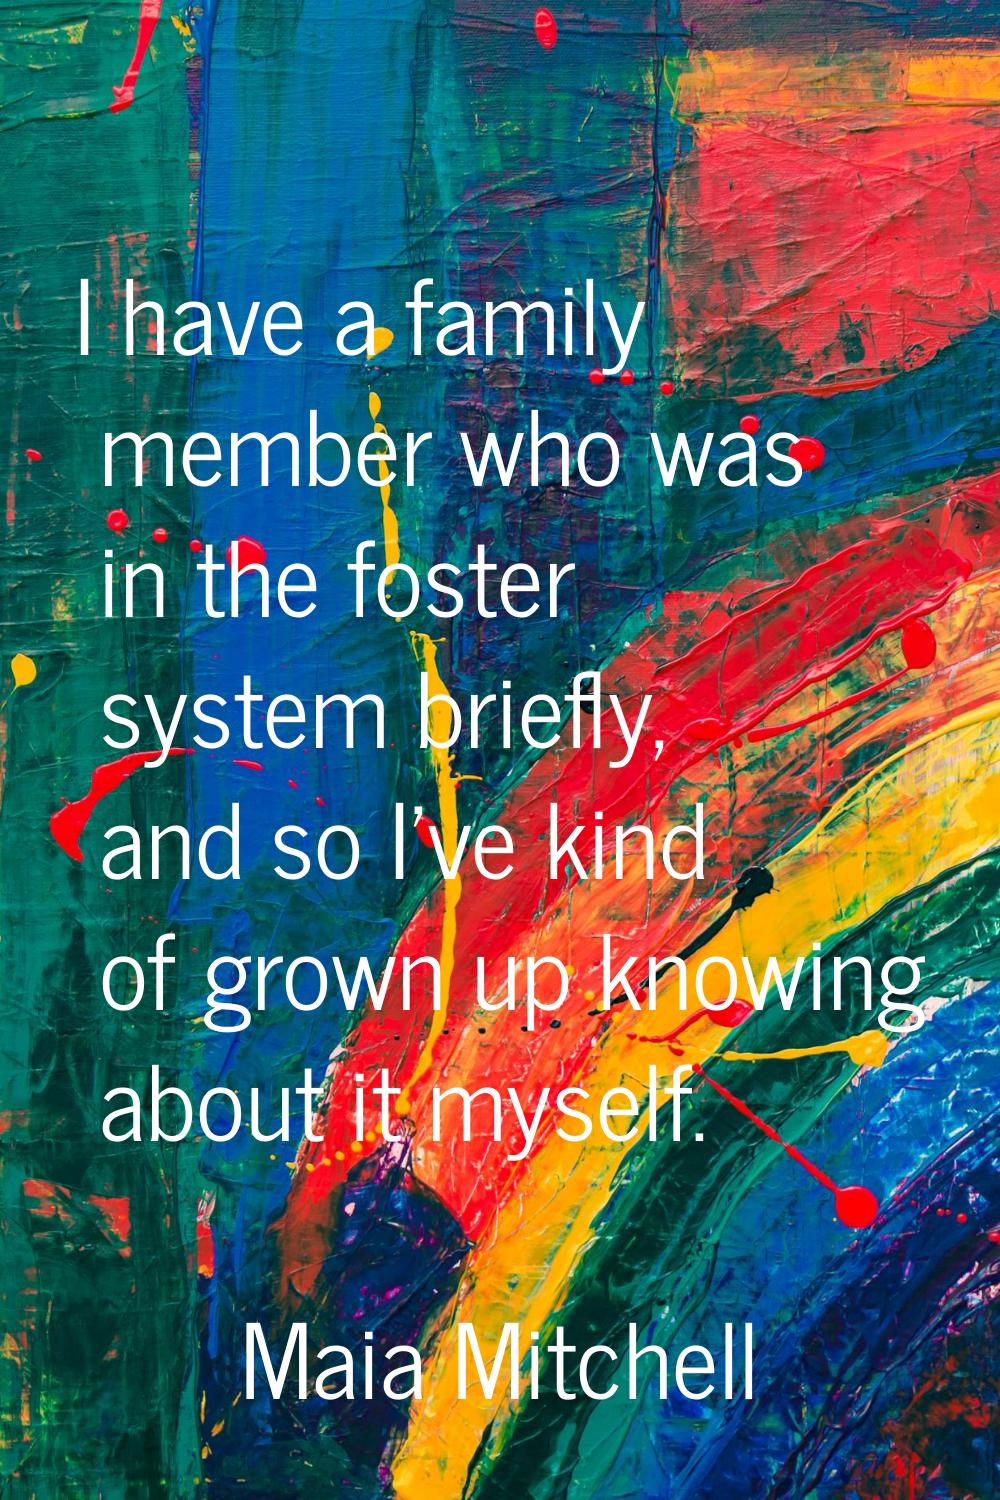 I have a family member who was in the foster system briefly, and so I've kind of grown up knowing a